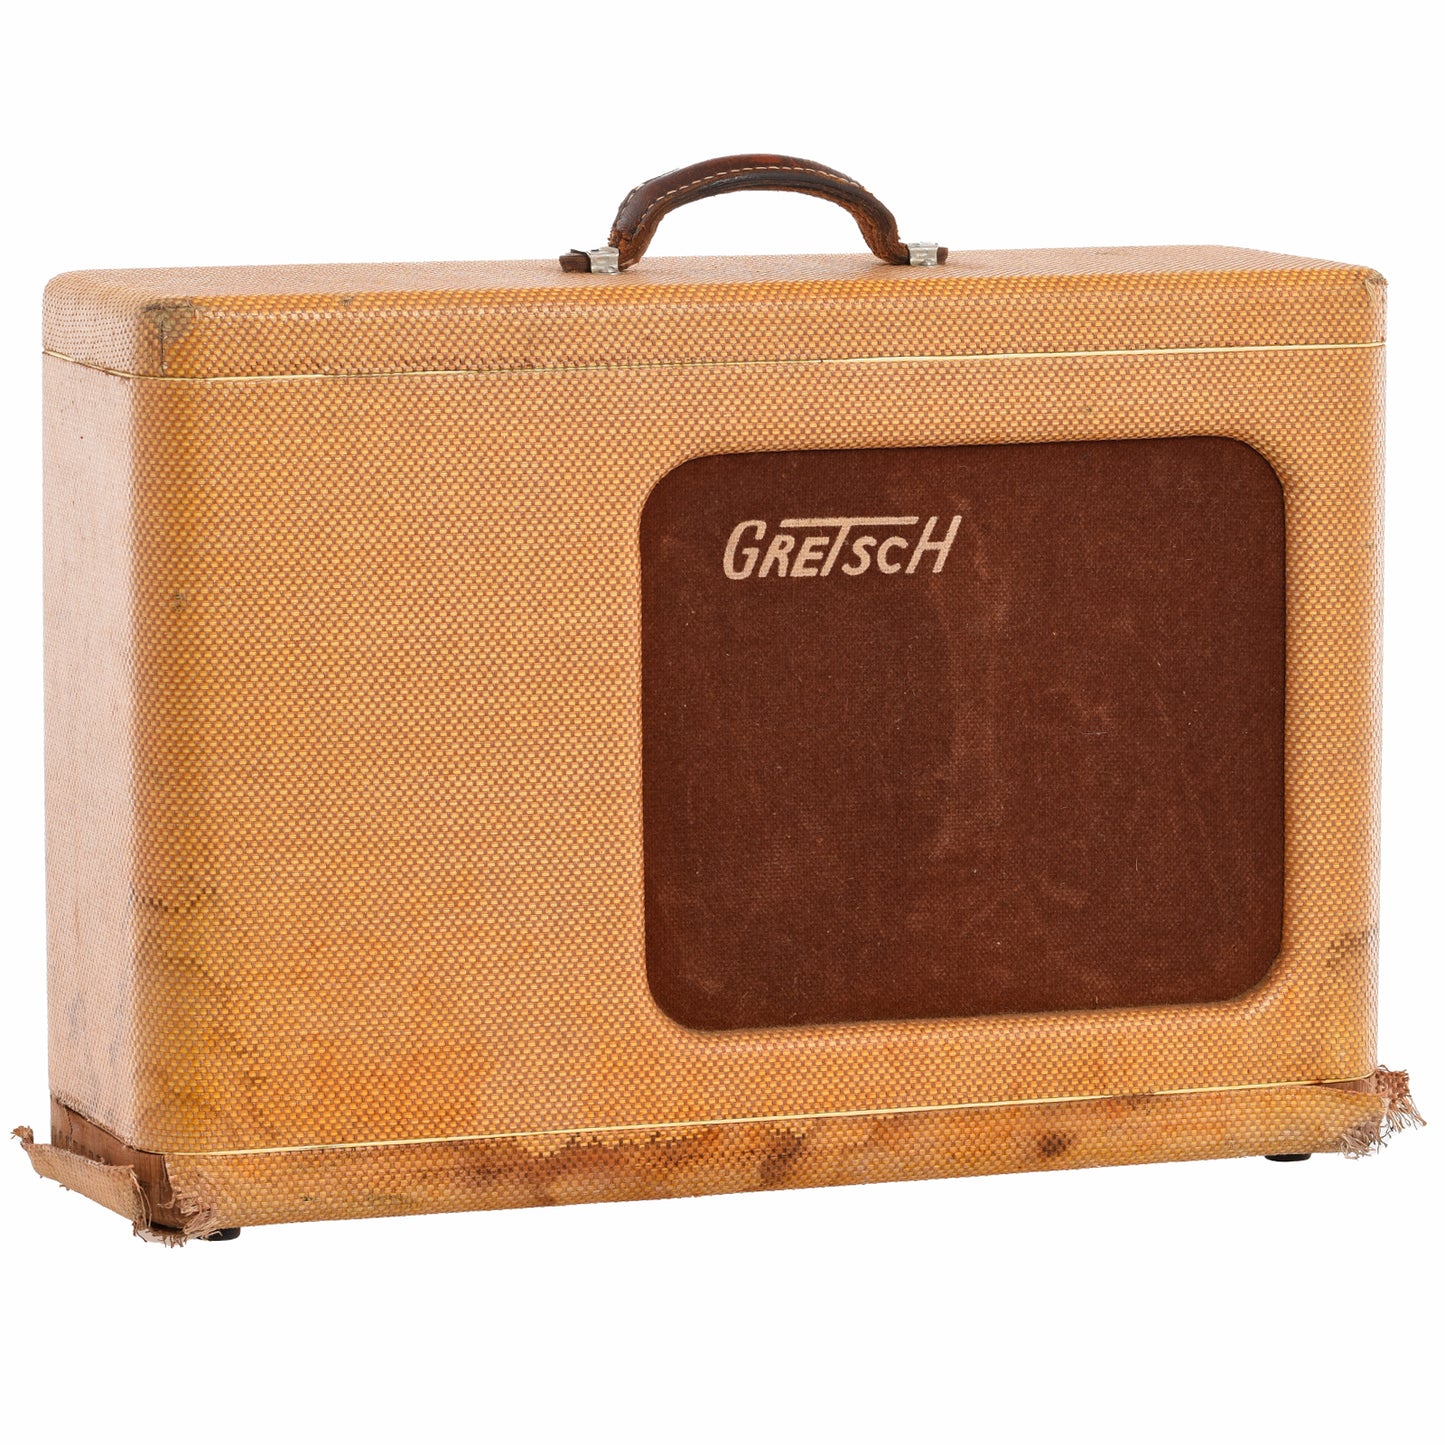 Front and side of Gretsch Model 6161 Combo Amp